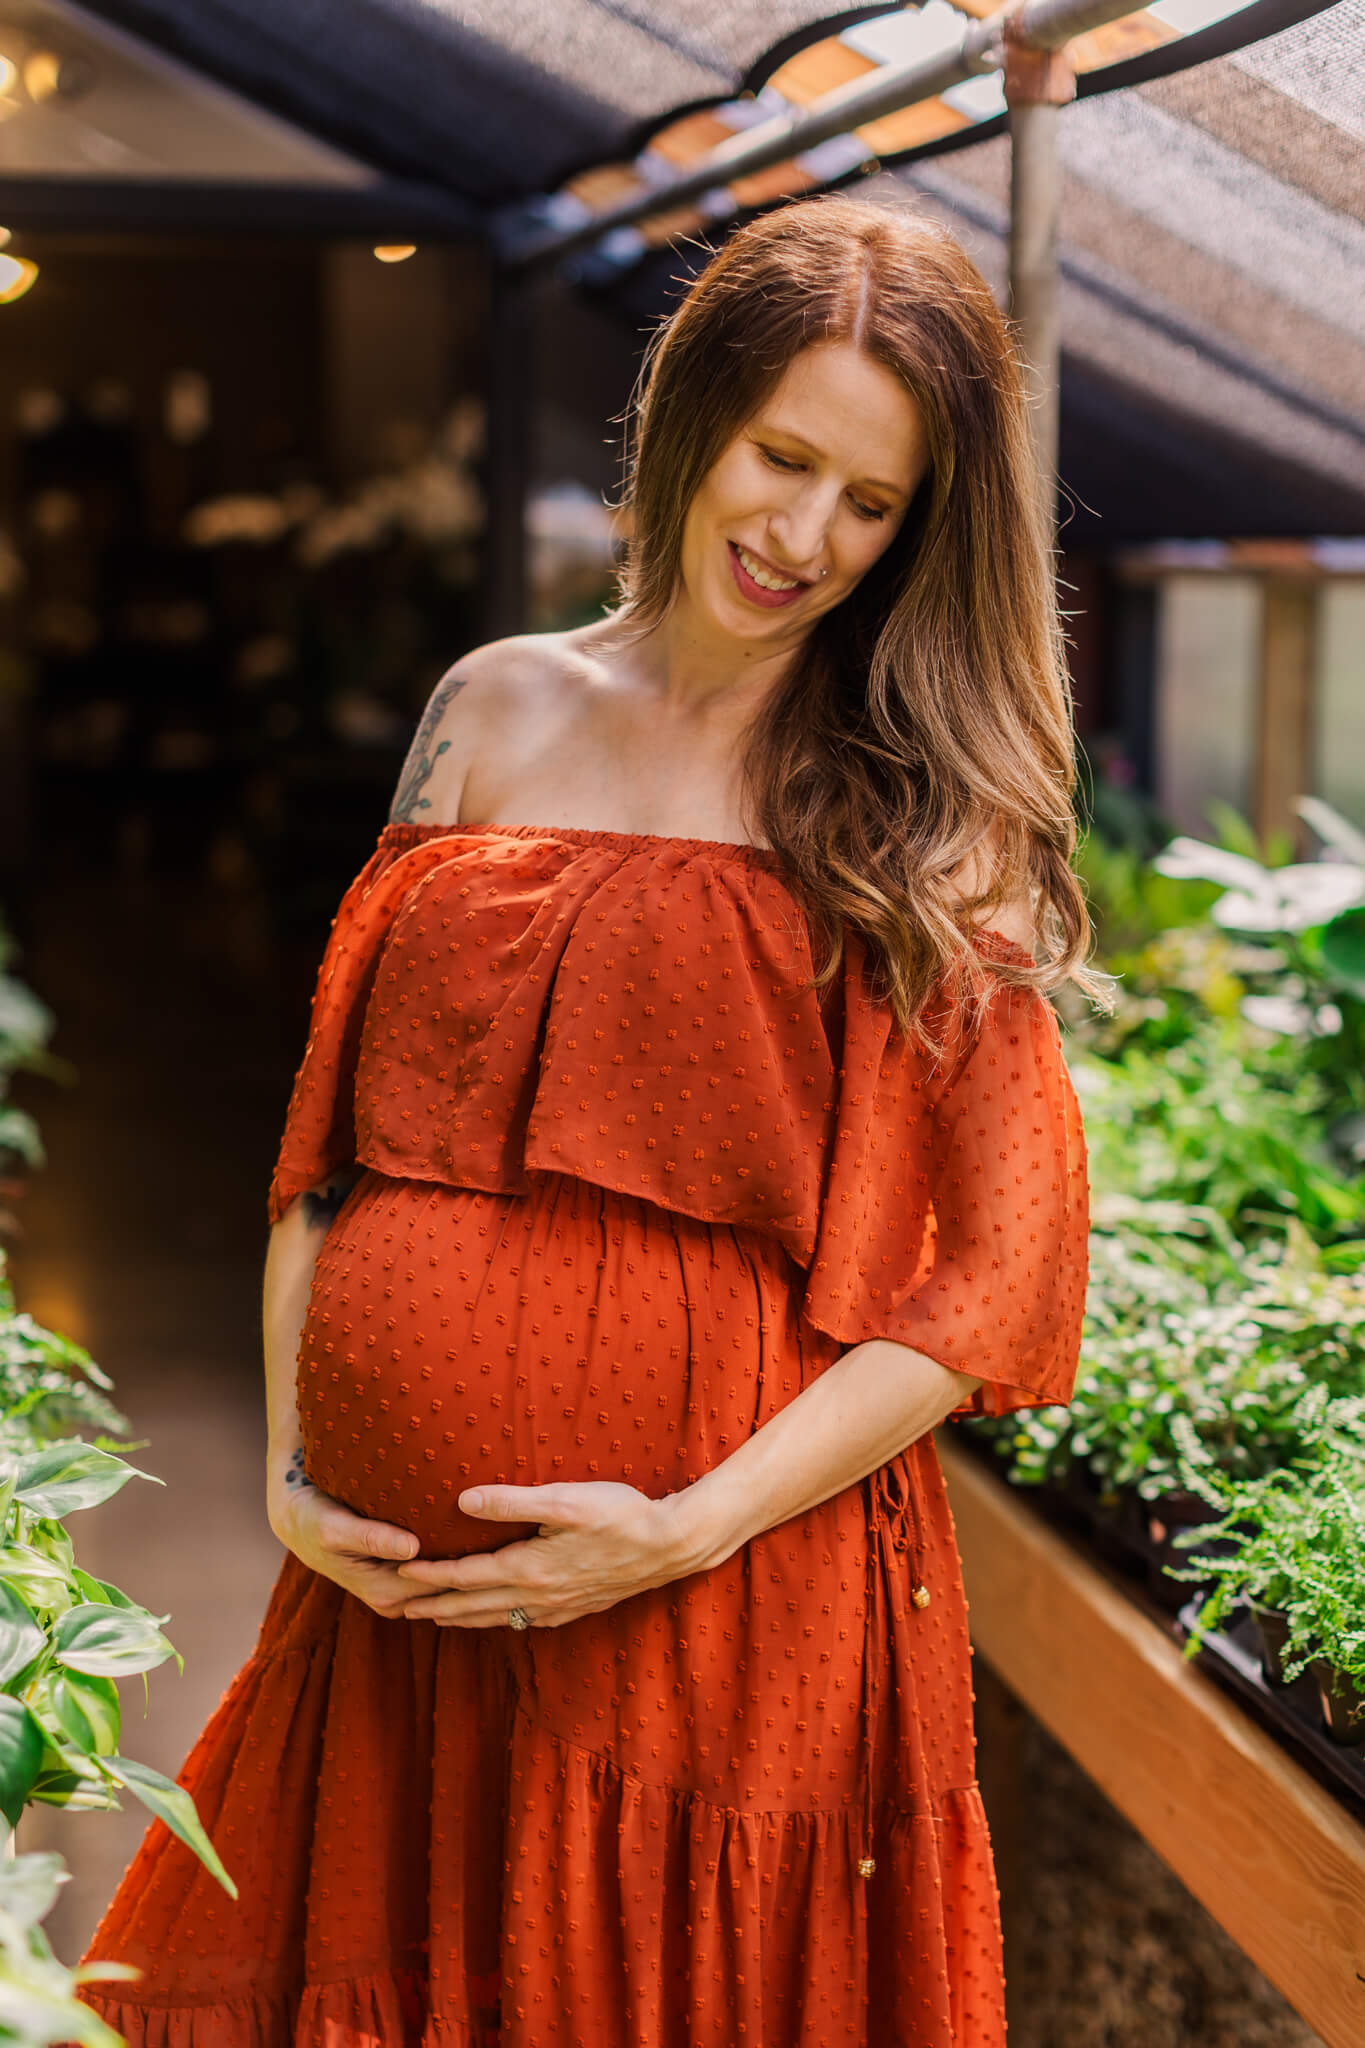 Expecting mom capturing her maternity portraits wearing a burnt orange baltic born dress from my client closet. Photo captured by molly berry photography.
obgyn augusta ga